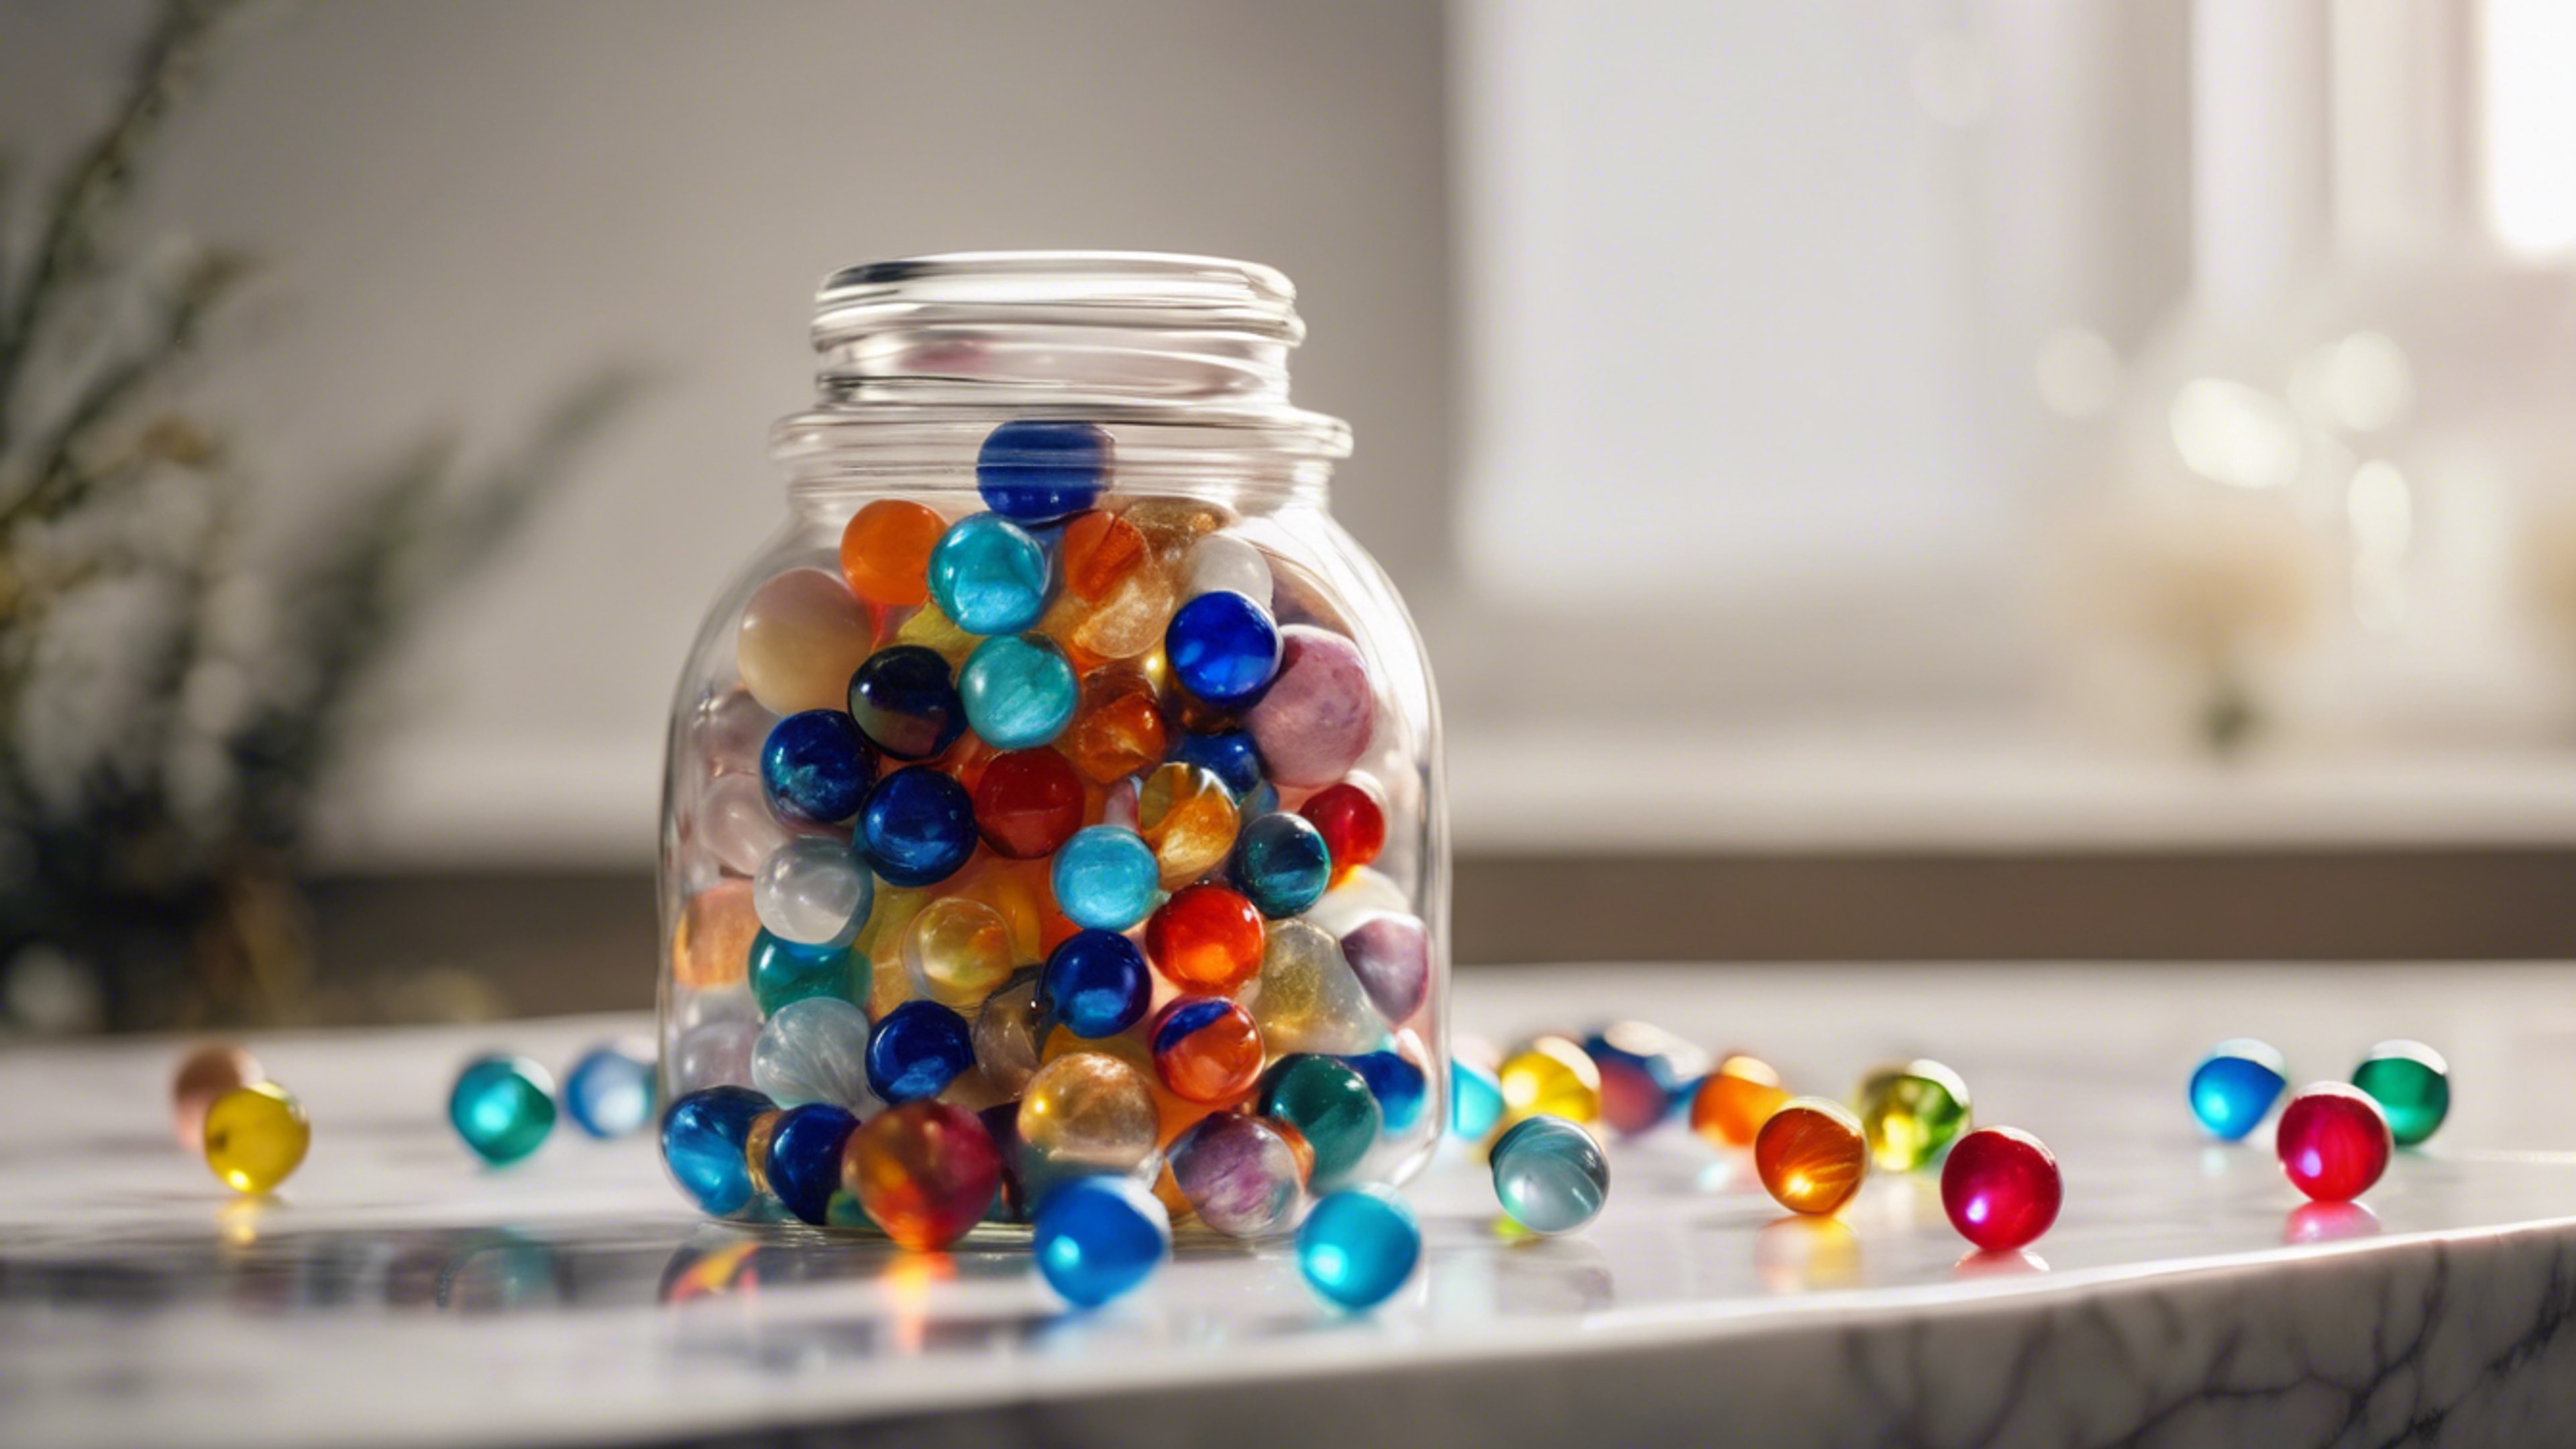 A glass jar full of colorful marbles with glinting lights around them, placed on a white marble surface. Tapetai[9438bf9259b84d3ca042]